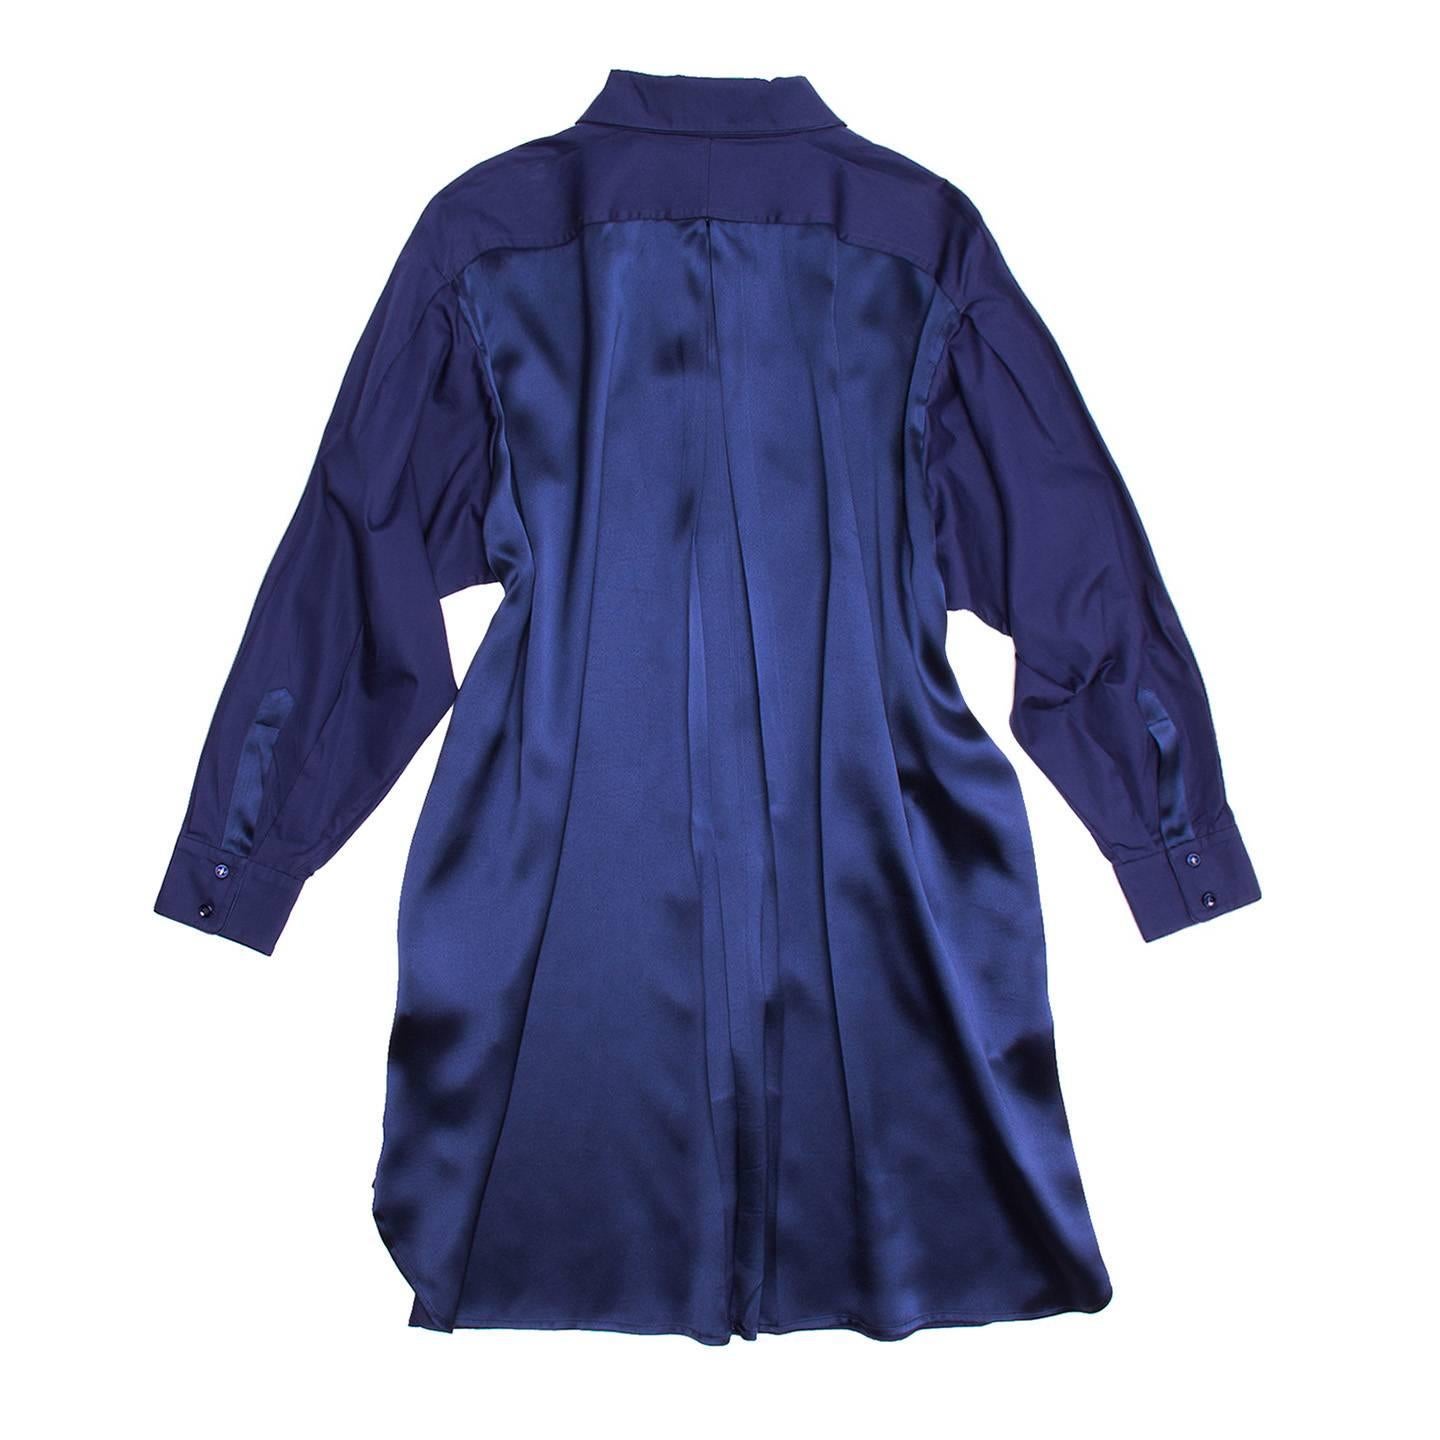 Royal blue drop shoulder long sleeve shirt and cotton dress. Silk rosettes covering buttons and silk strip running down center front placket. Buttoned down collar point detail. Buttoned cuffs with placket. Flowing silk backside panel. Self sash